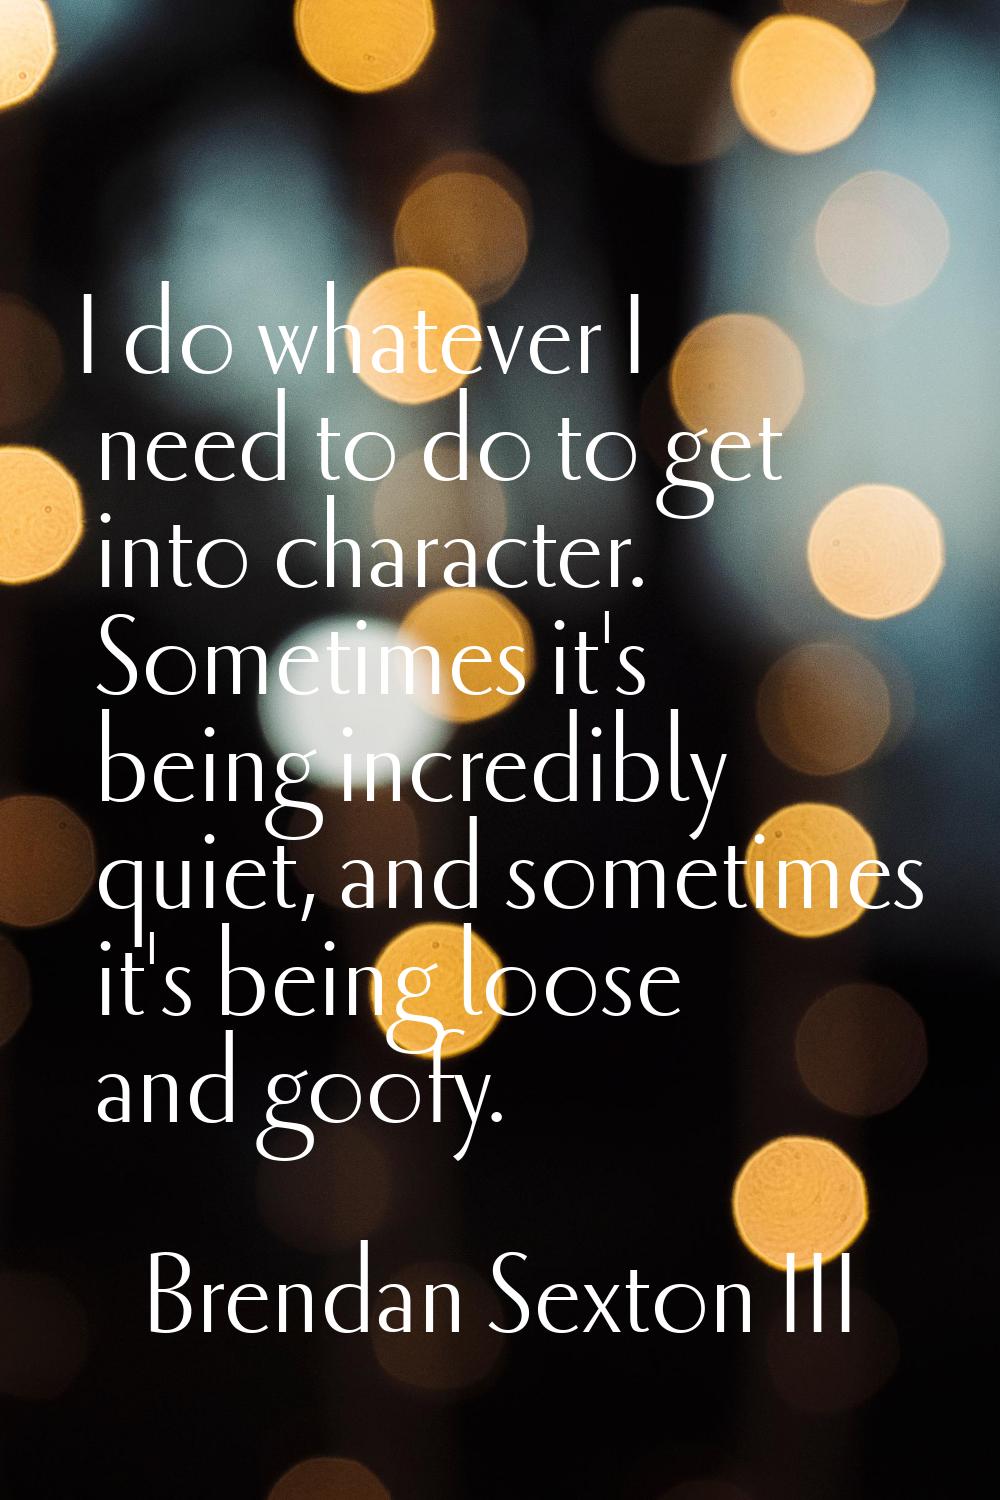 I do whatever I need to do to get into character. Sometimes it's being incredibly quiet, and someti